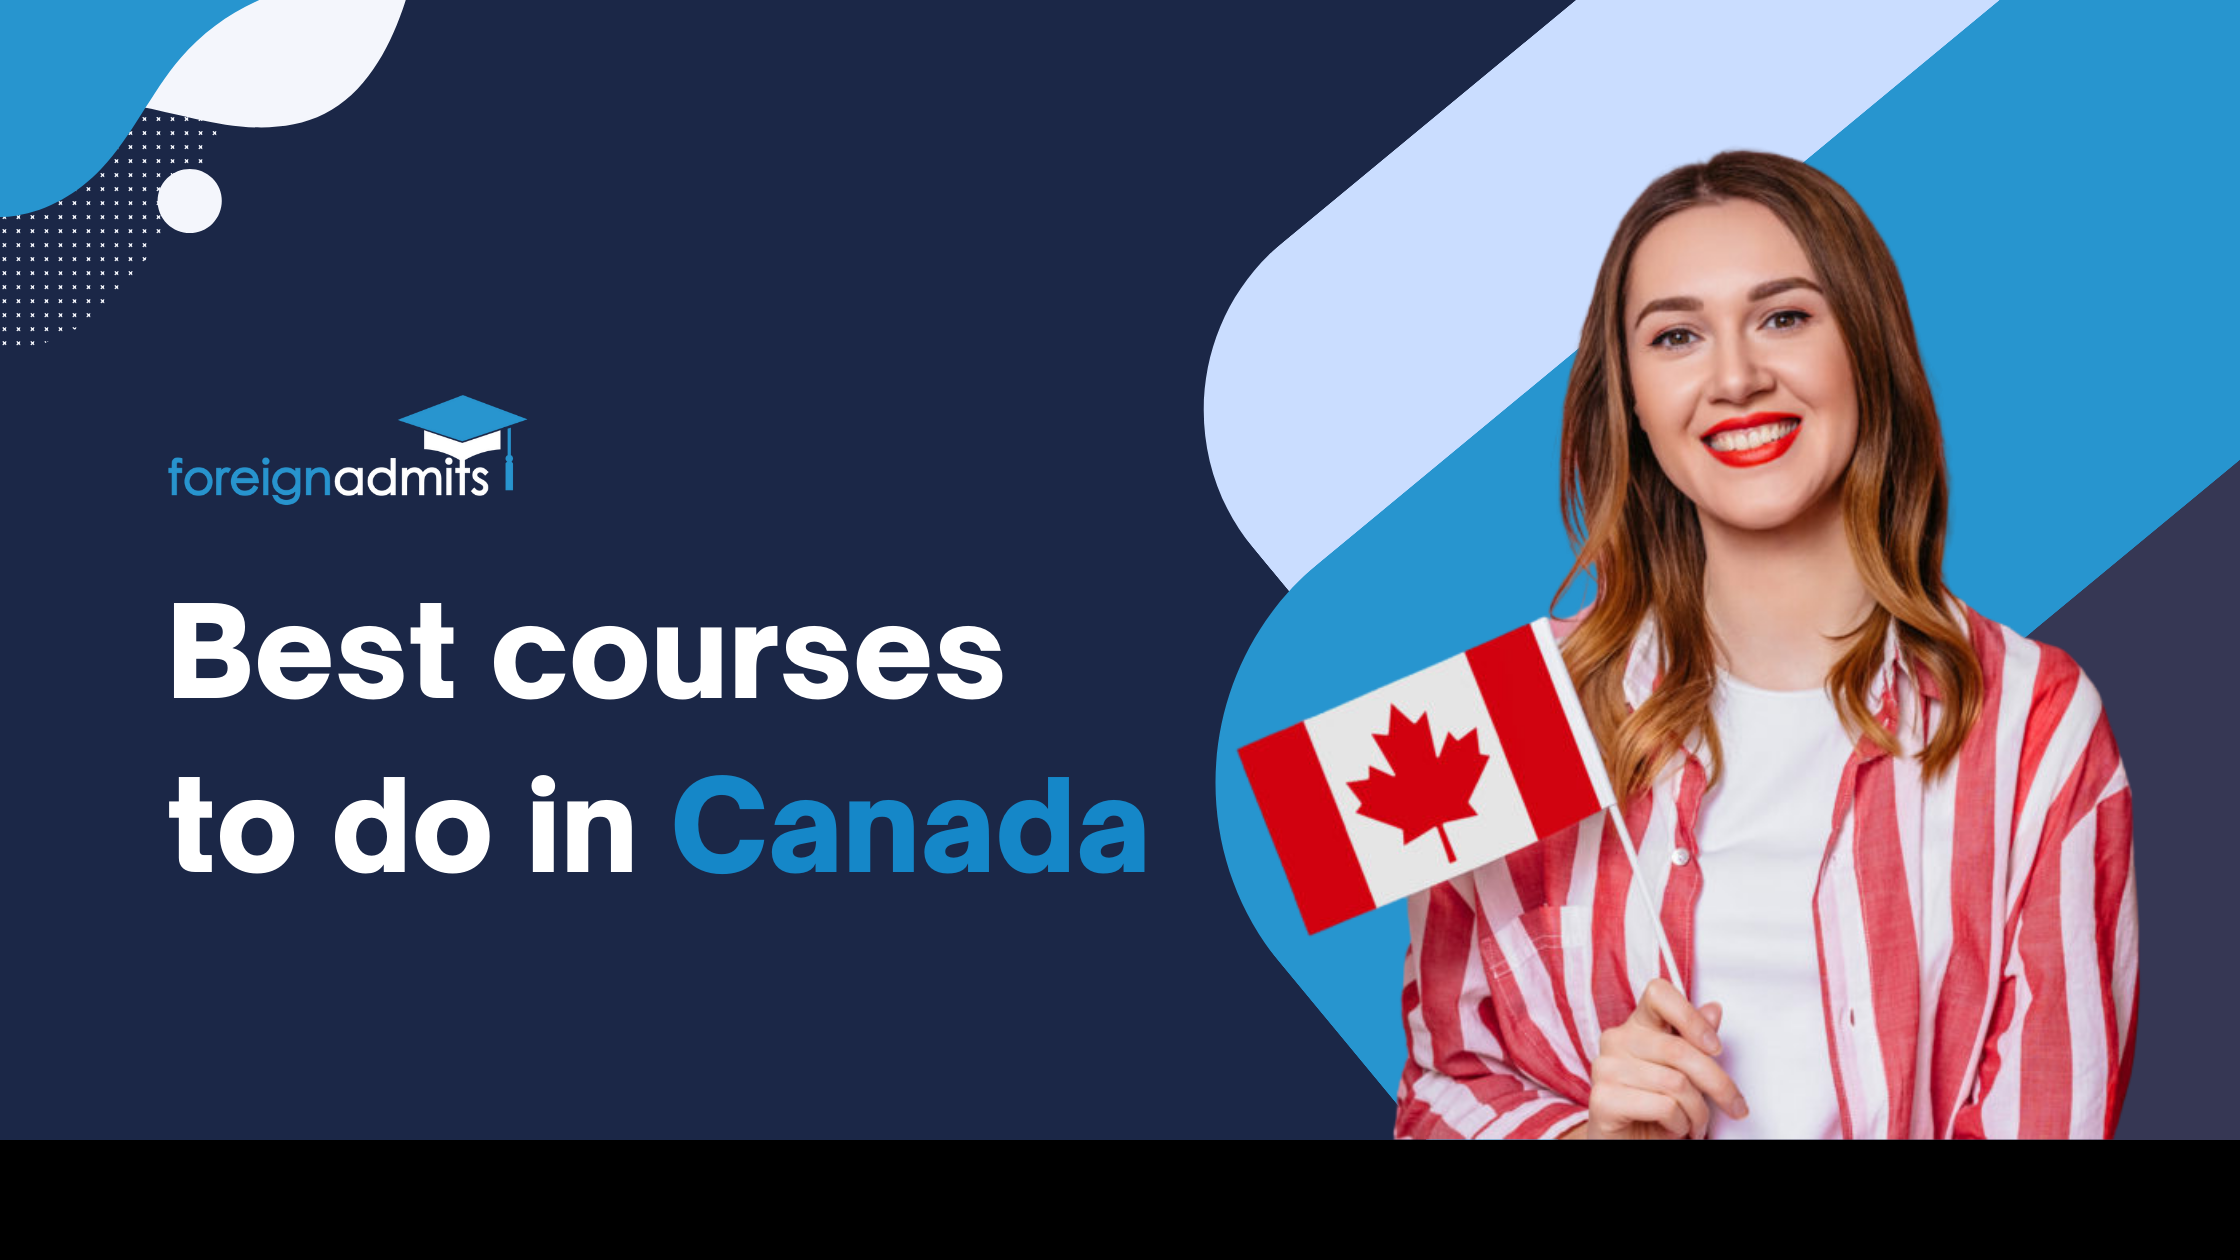 Best courses to do in Canada